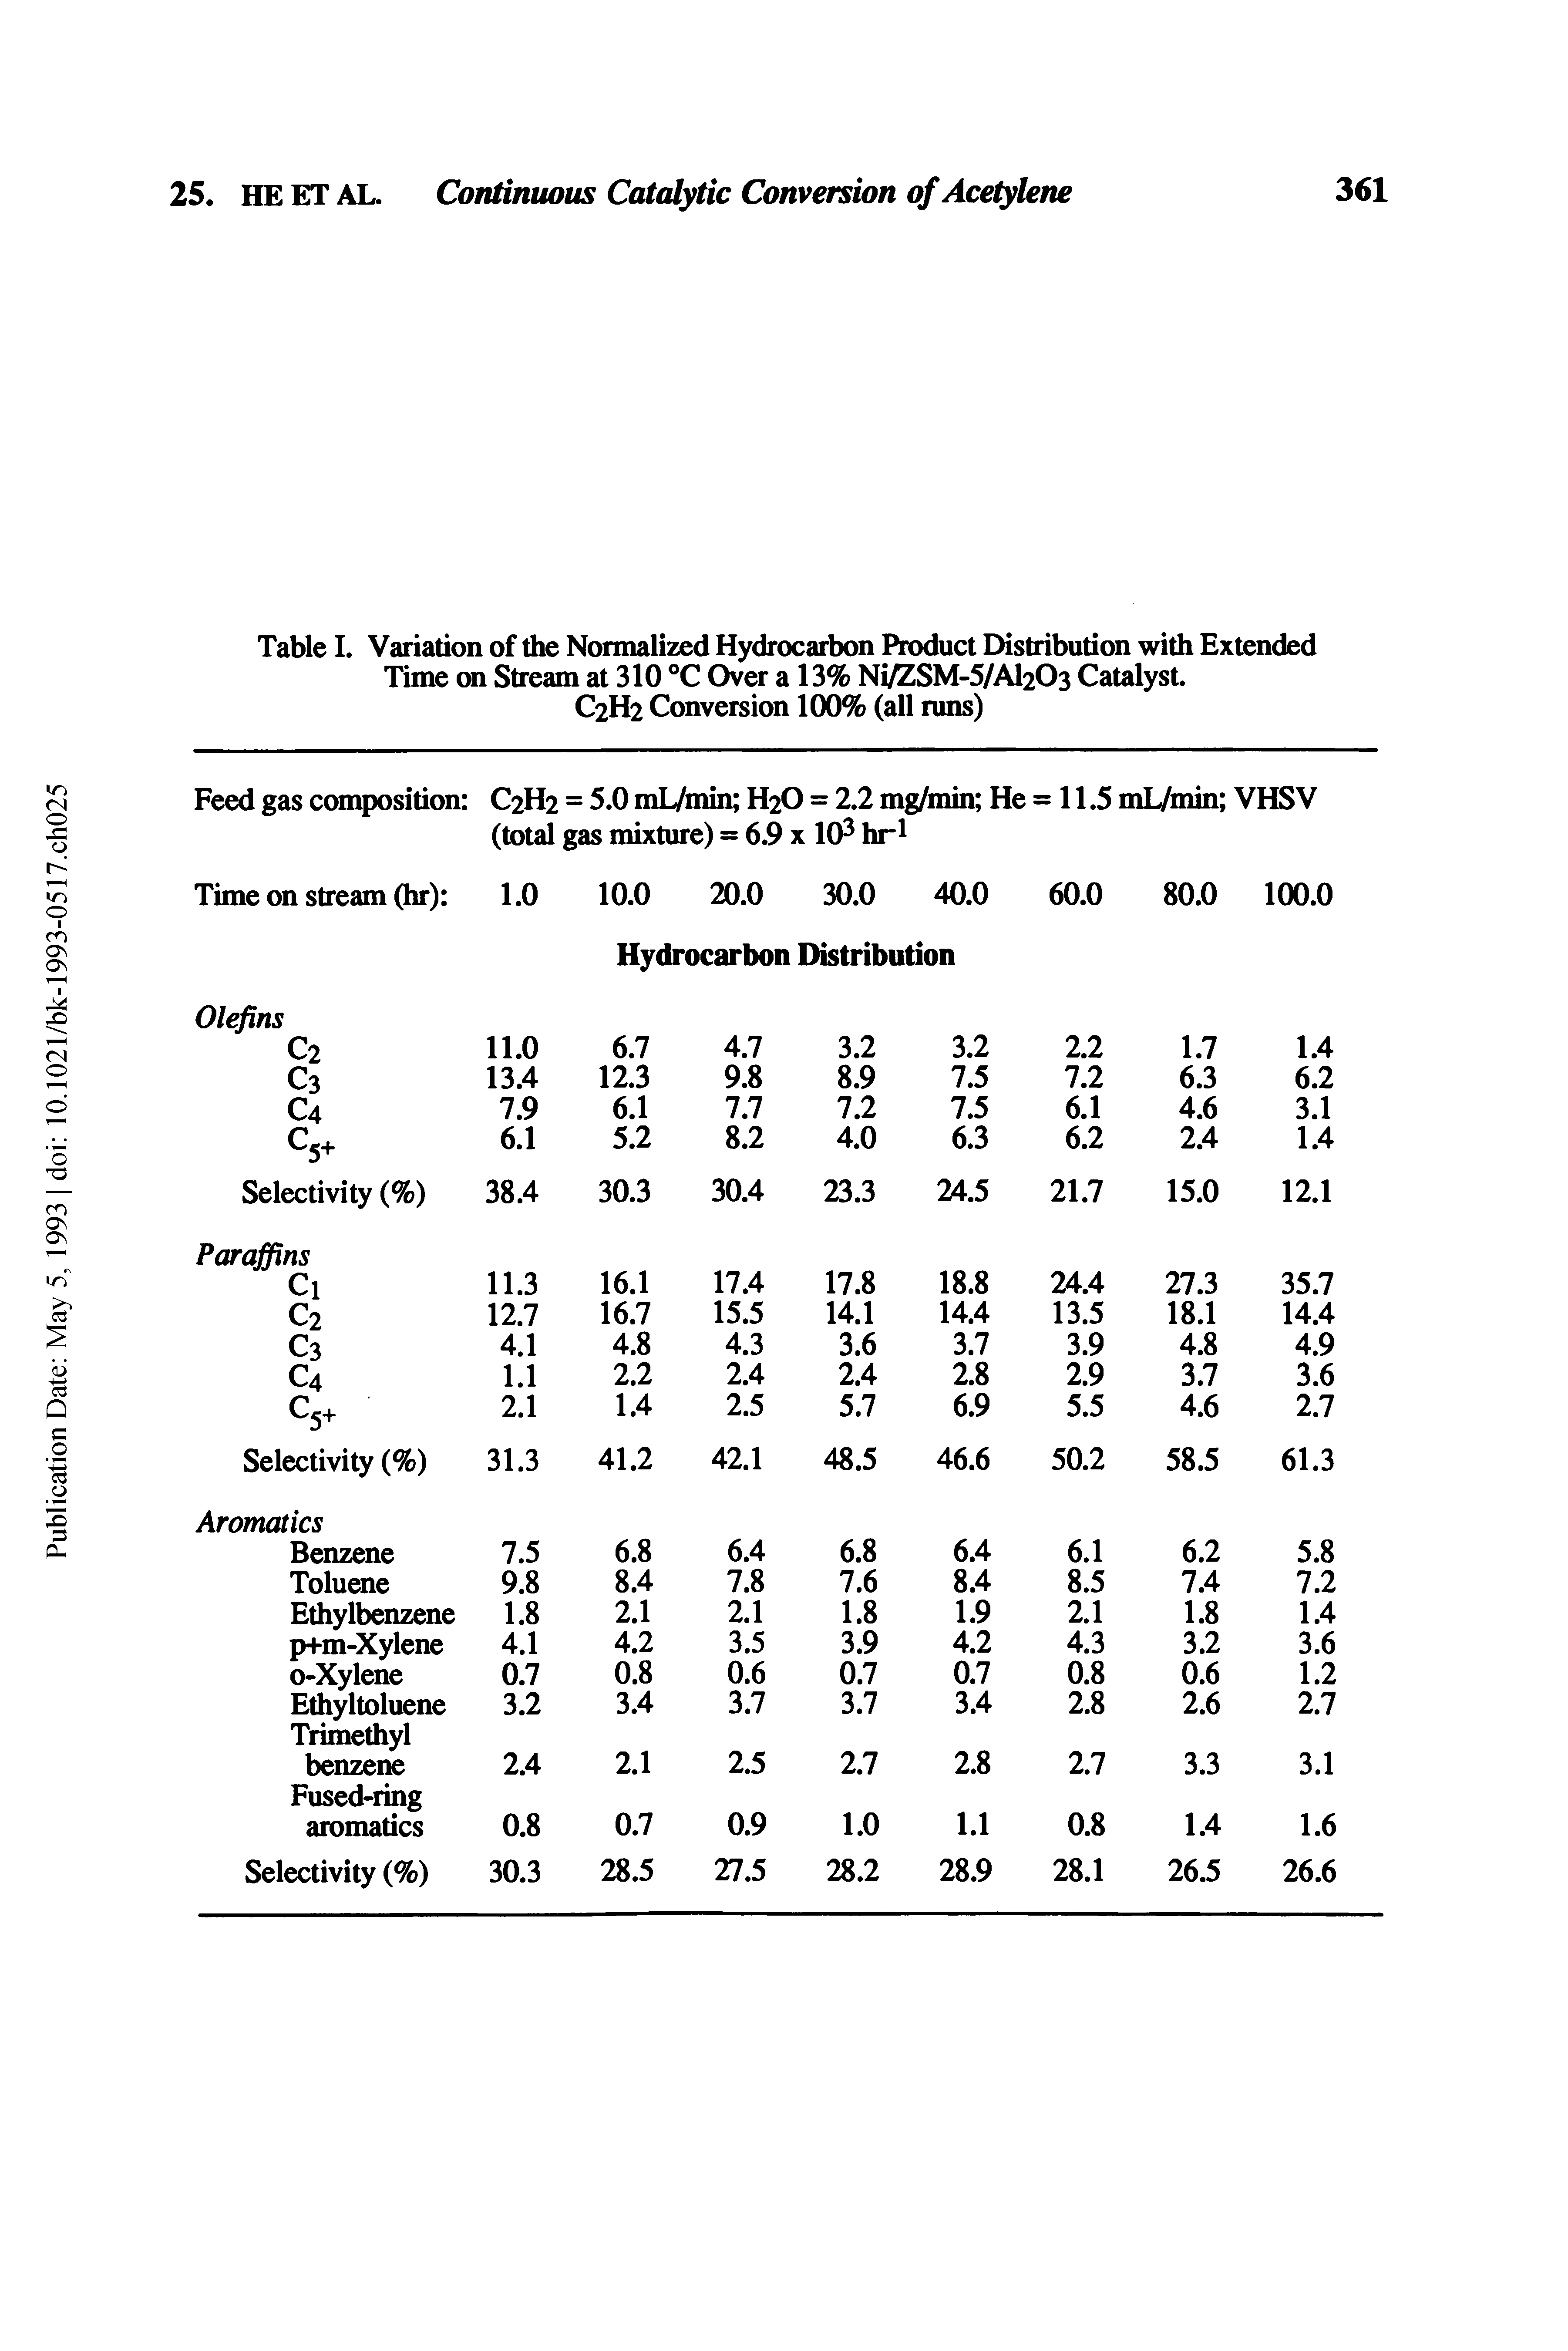 Table I. Variation of the Normalized Hydrocarbon Product Distribution with Extended Time on Stream at 310 °C Over a 13% Ni/ZSM-5/Al203 Catalyst.